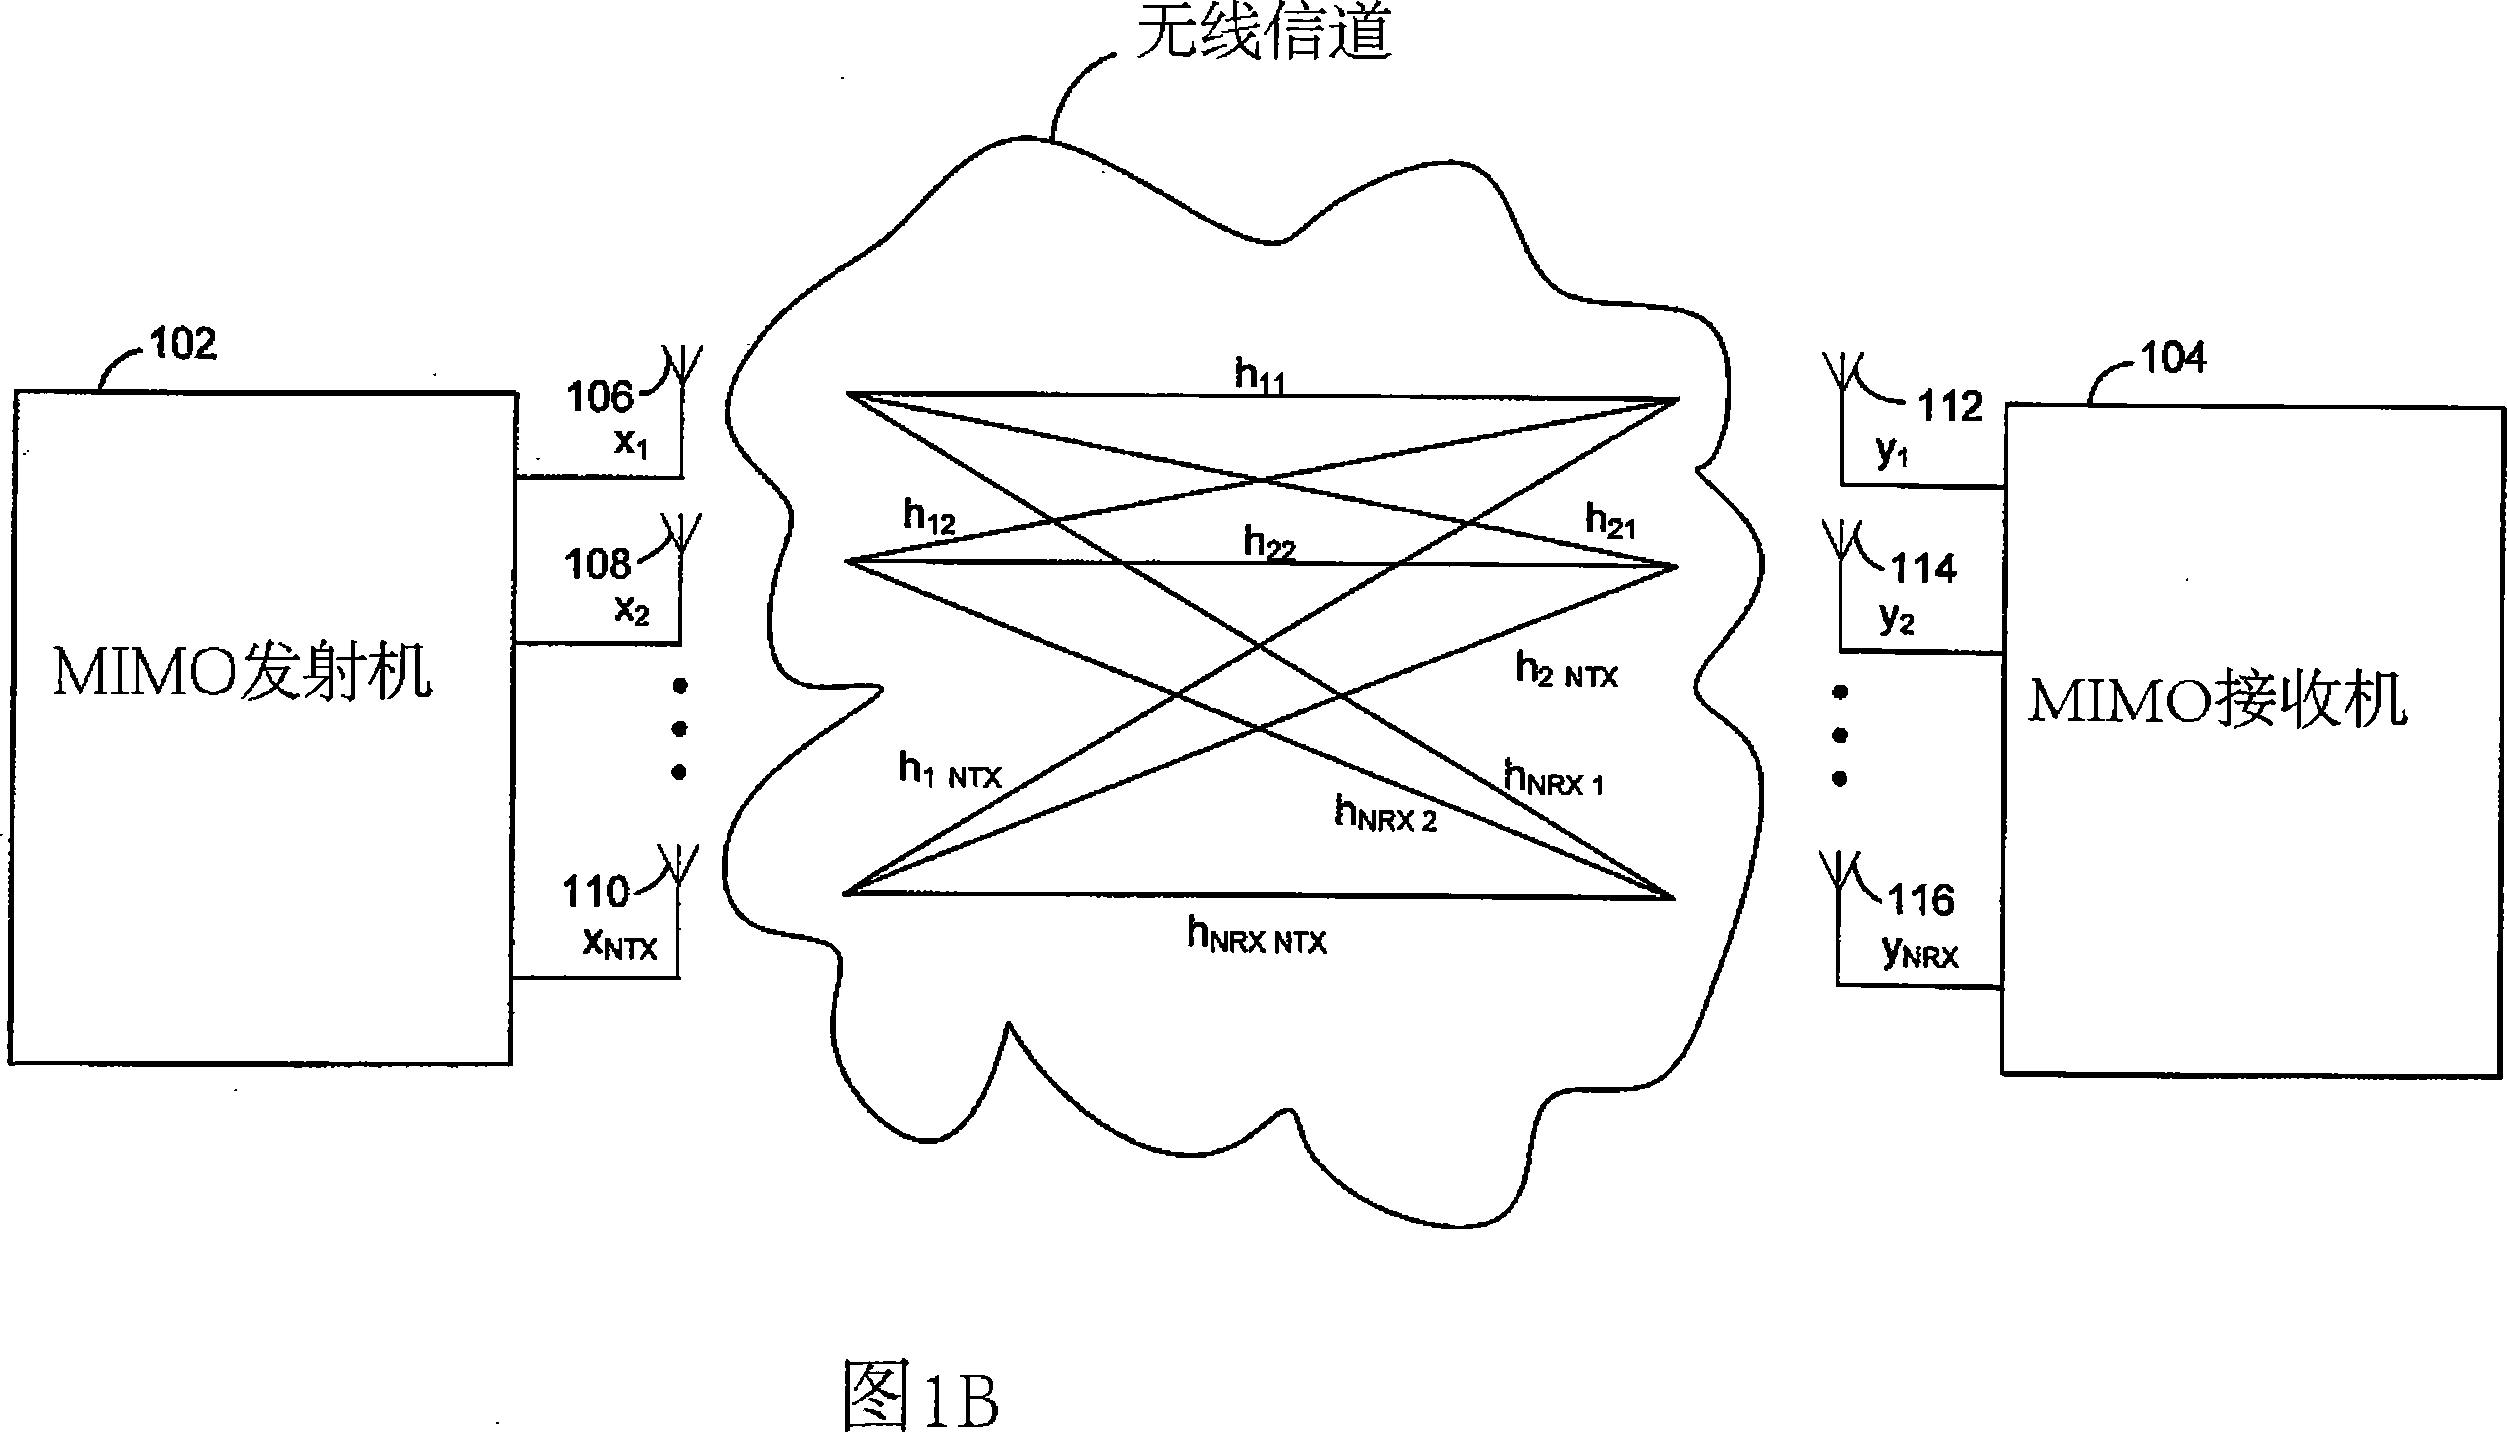 Method and system for an alternating channel delta quantizer for 2x2 mimo pre-coders with finite rate channel state information feedback